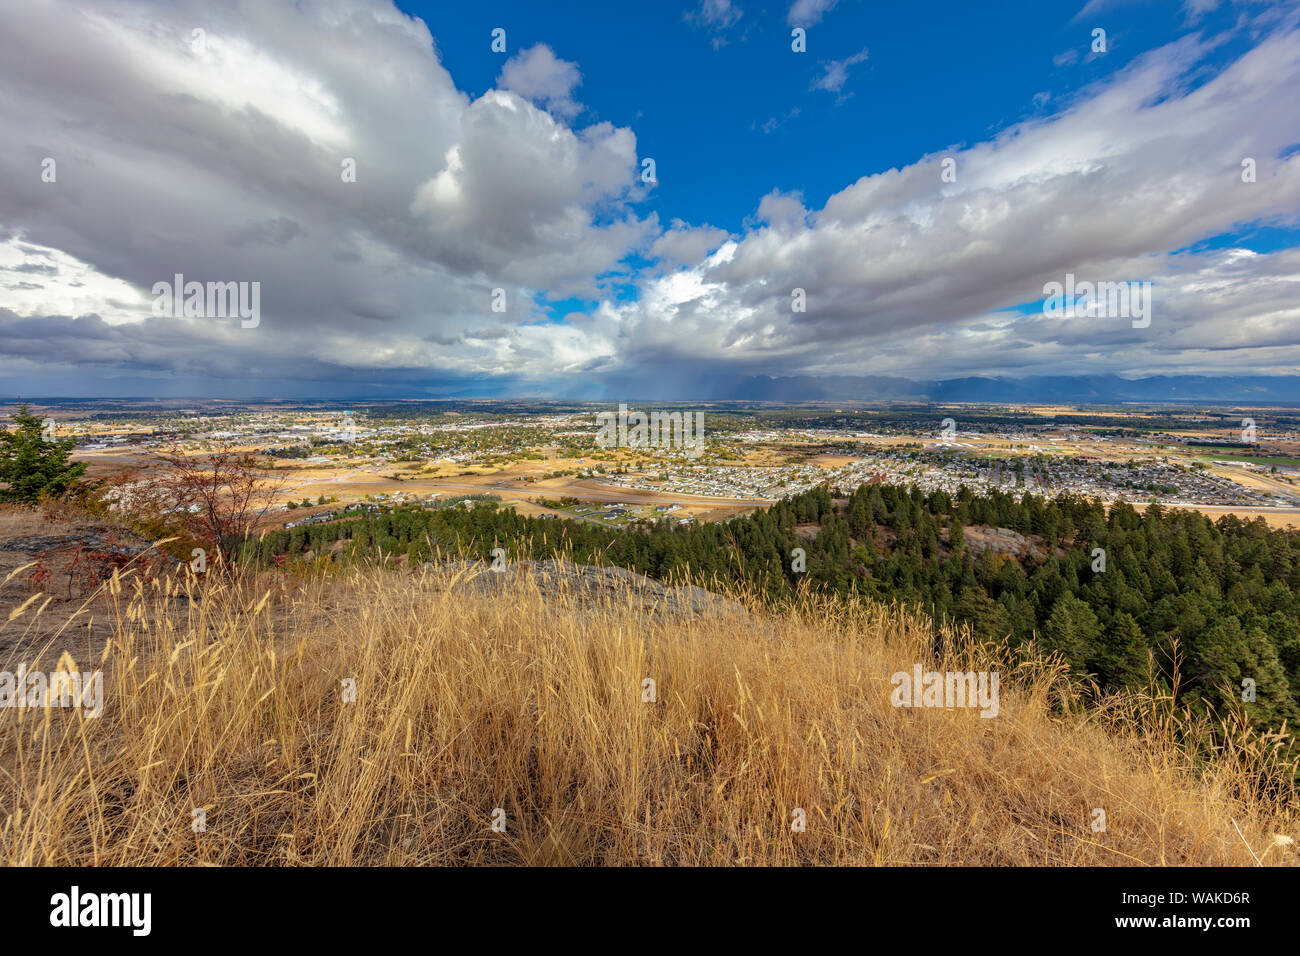 View of Kalispell and the Flathead Valley from overlook at Lone Pine State Park in Kalispell, Montana, USA Stock Photo